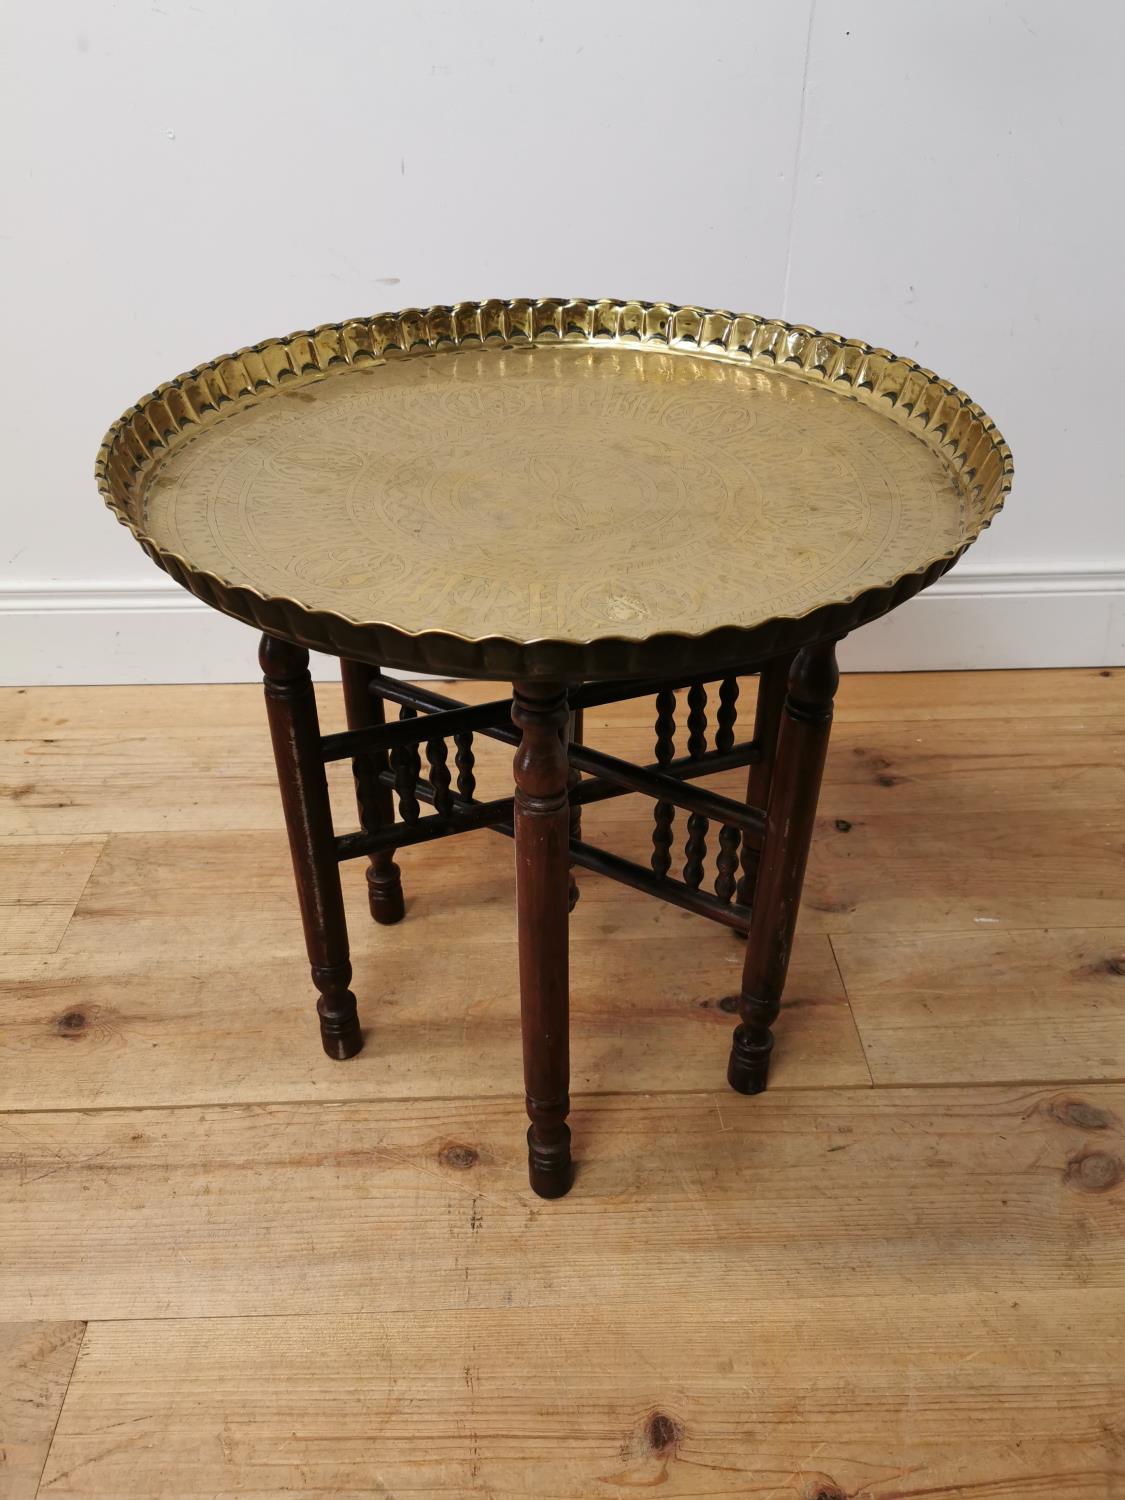 1950's mahogany and brass Indian tea table {55 cm H x 57 cm Dia.}.